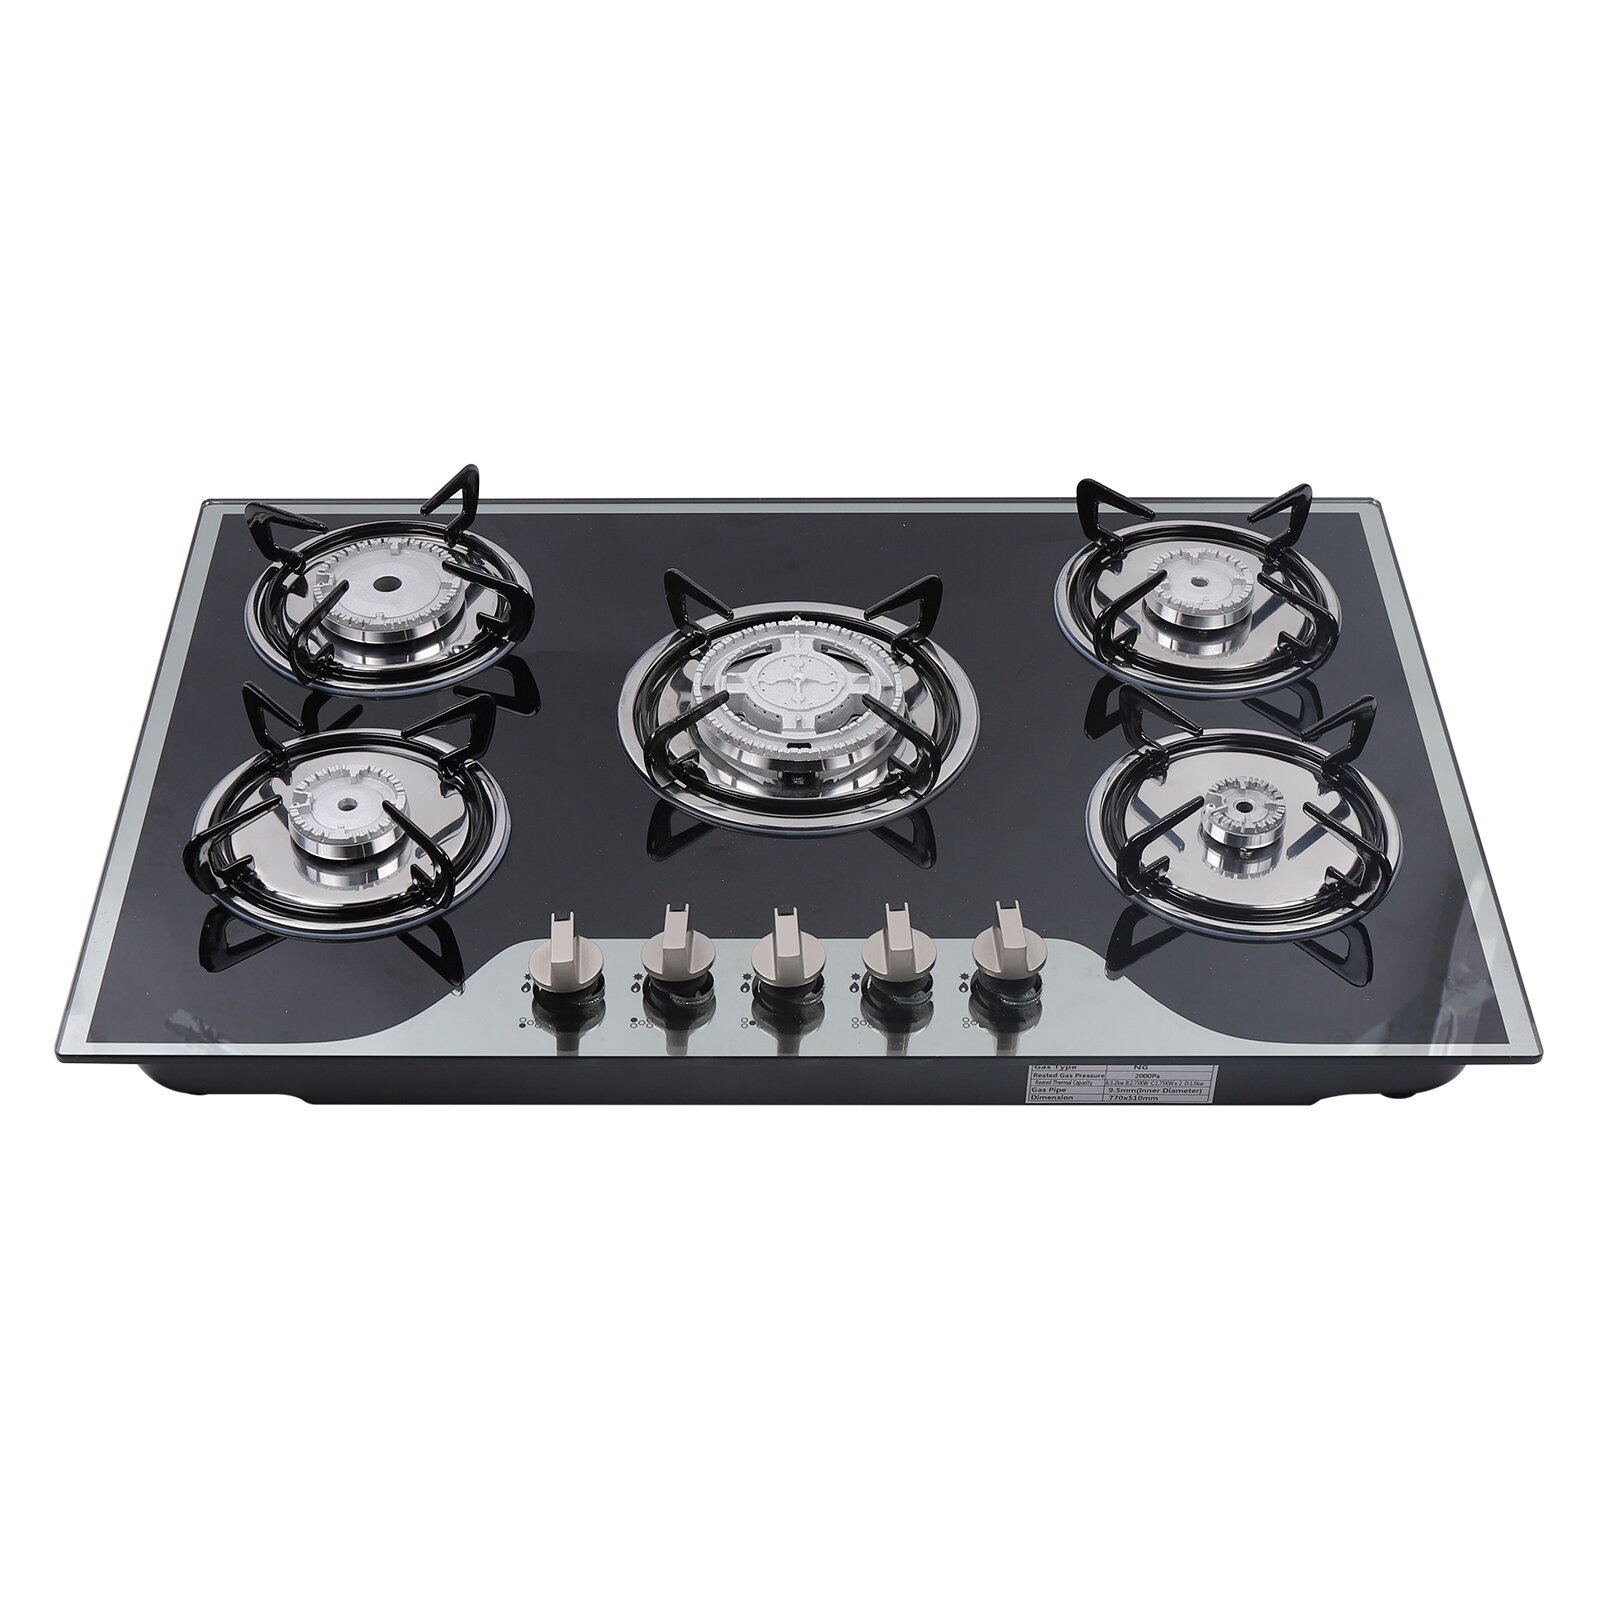 22″x20″ Built in Gas Cooktop 4 Burners Stainless Steel Stove NG/LPG Gas Hob  US